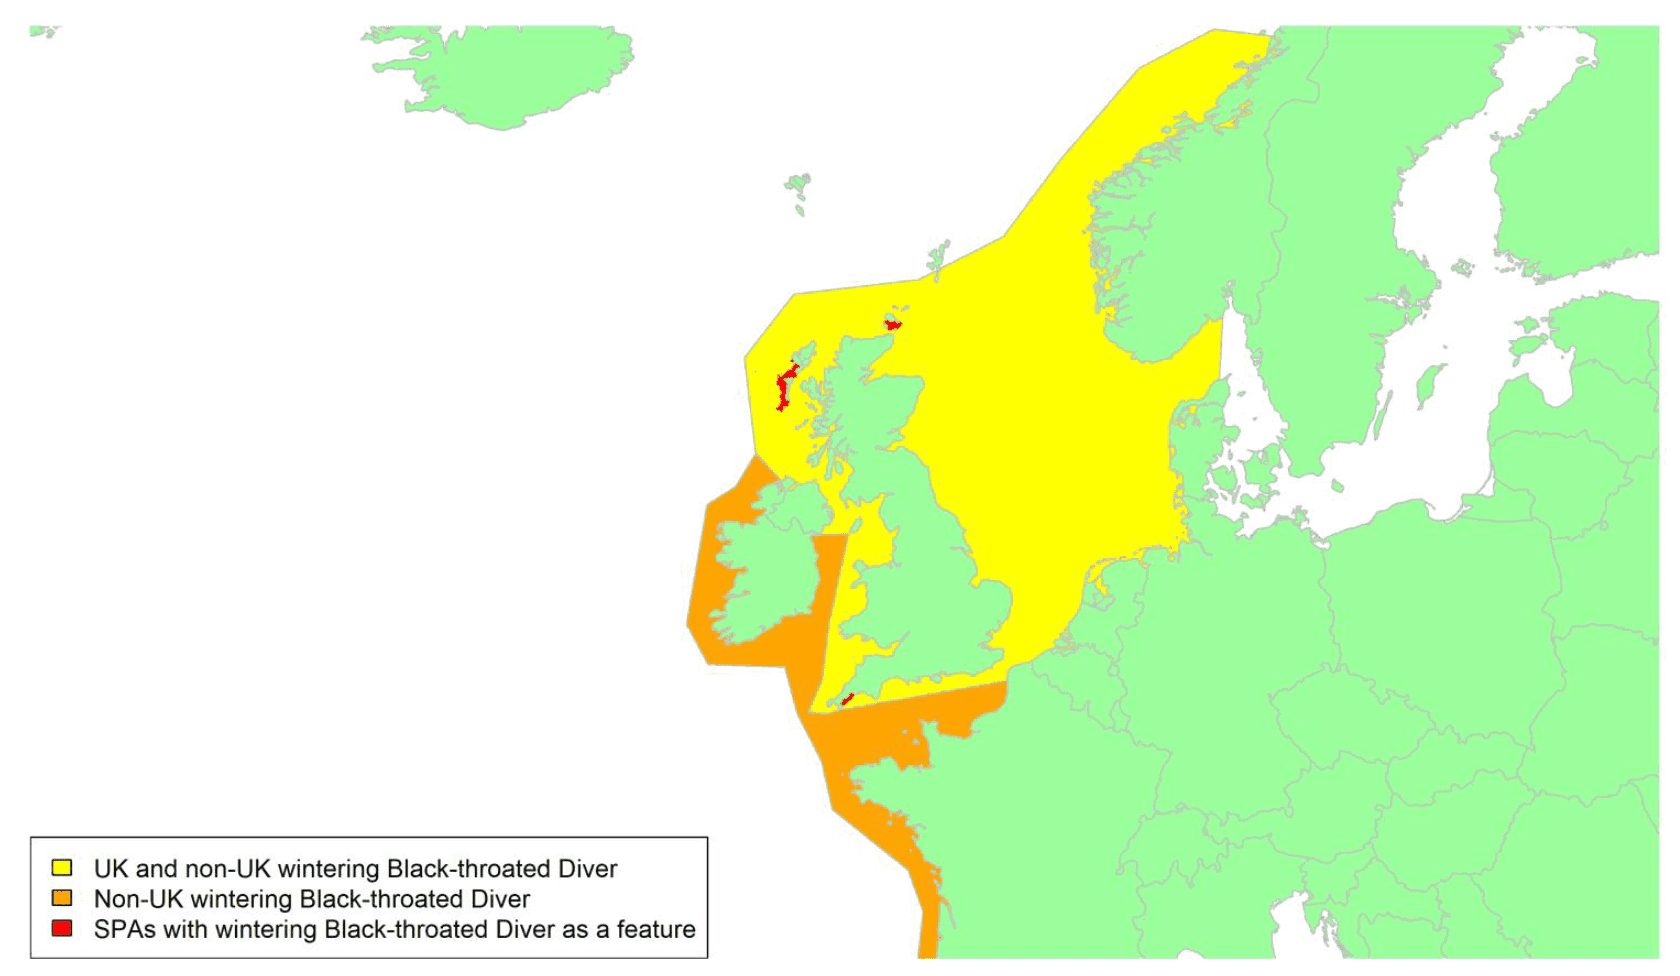 Map of North West Europe showing migratory routes and SPAs within the UK for wintering Black-throated Diver as described in the text below.